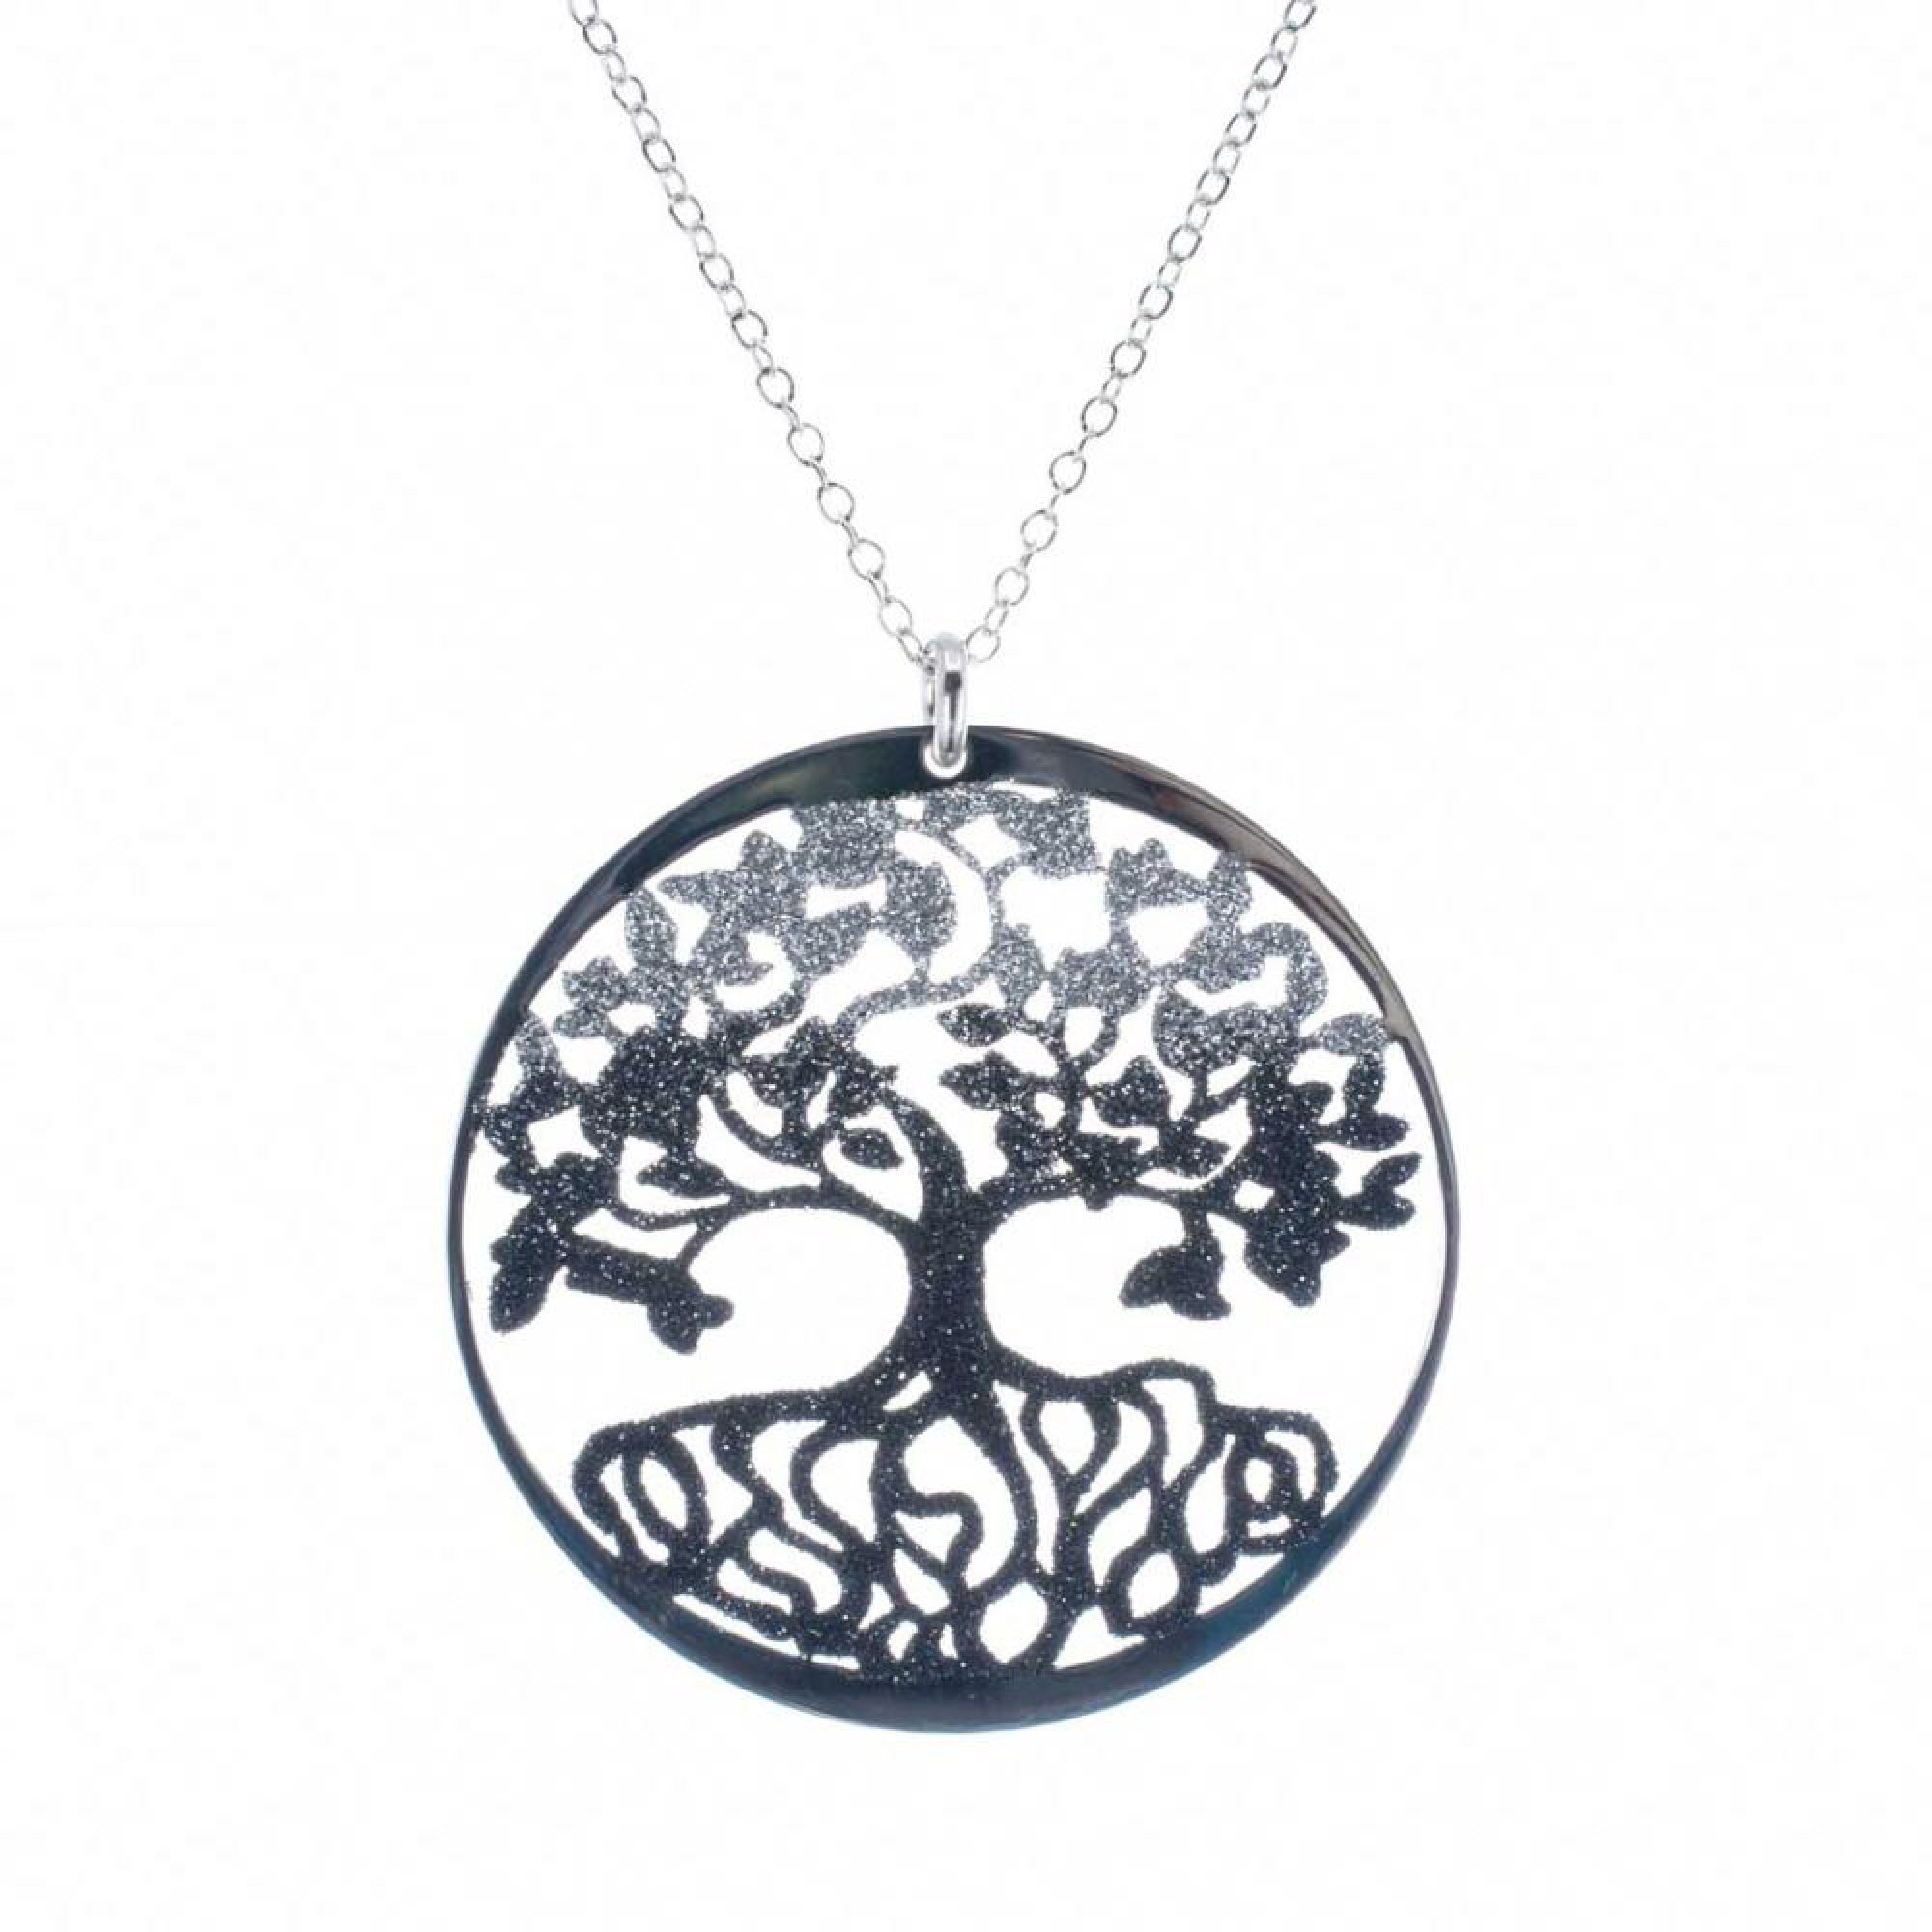 Tree of life necklace with bicolored glitter